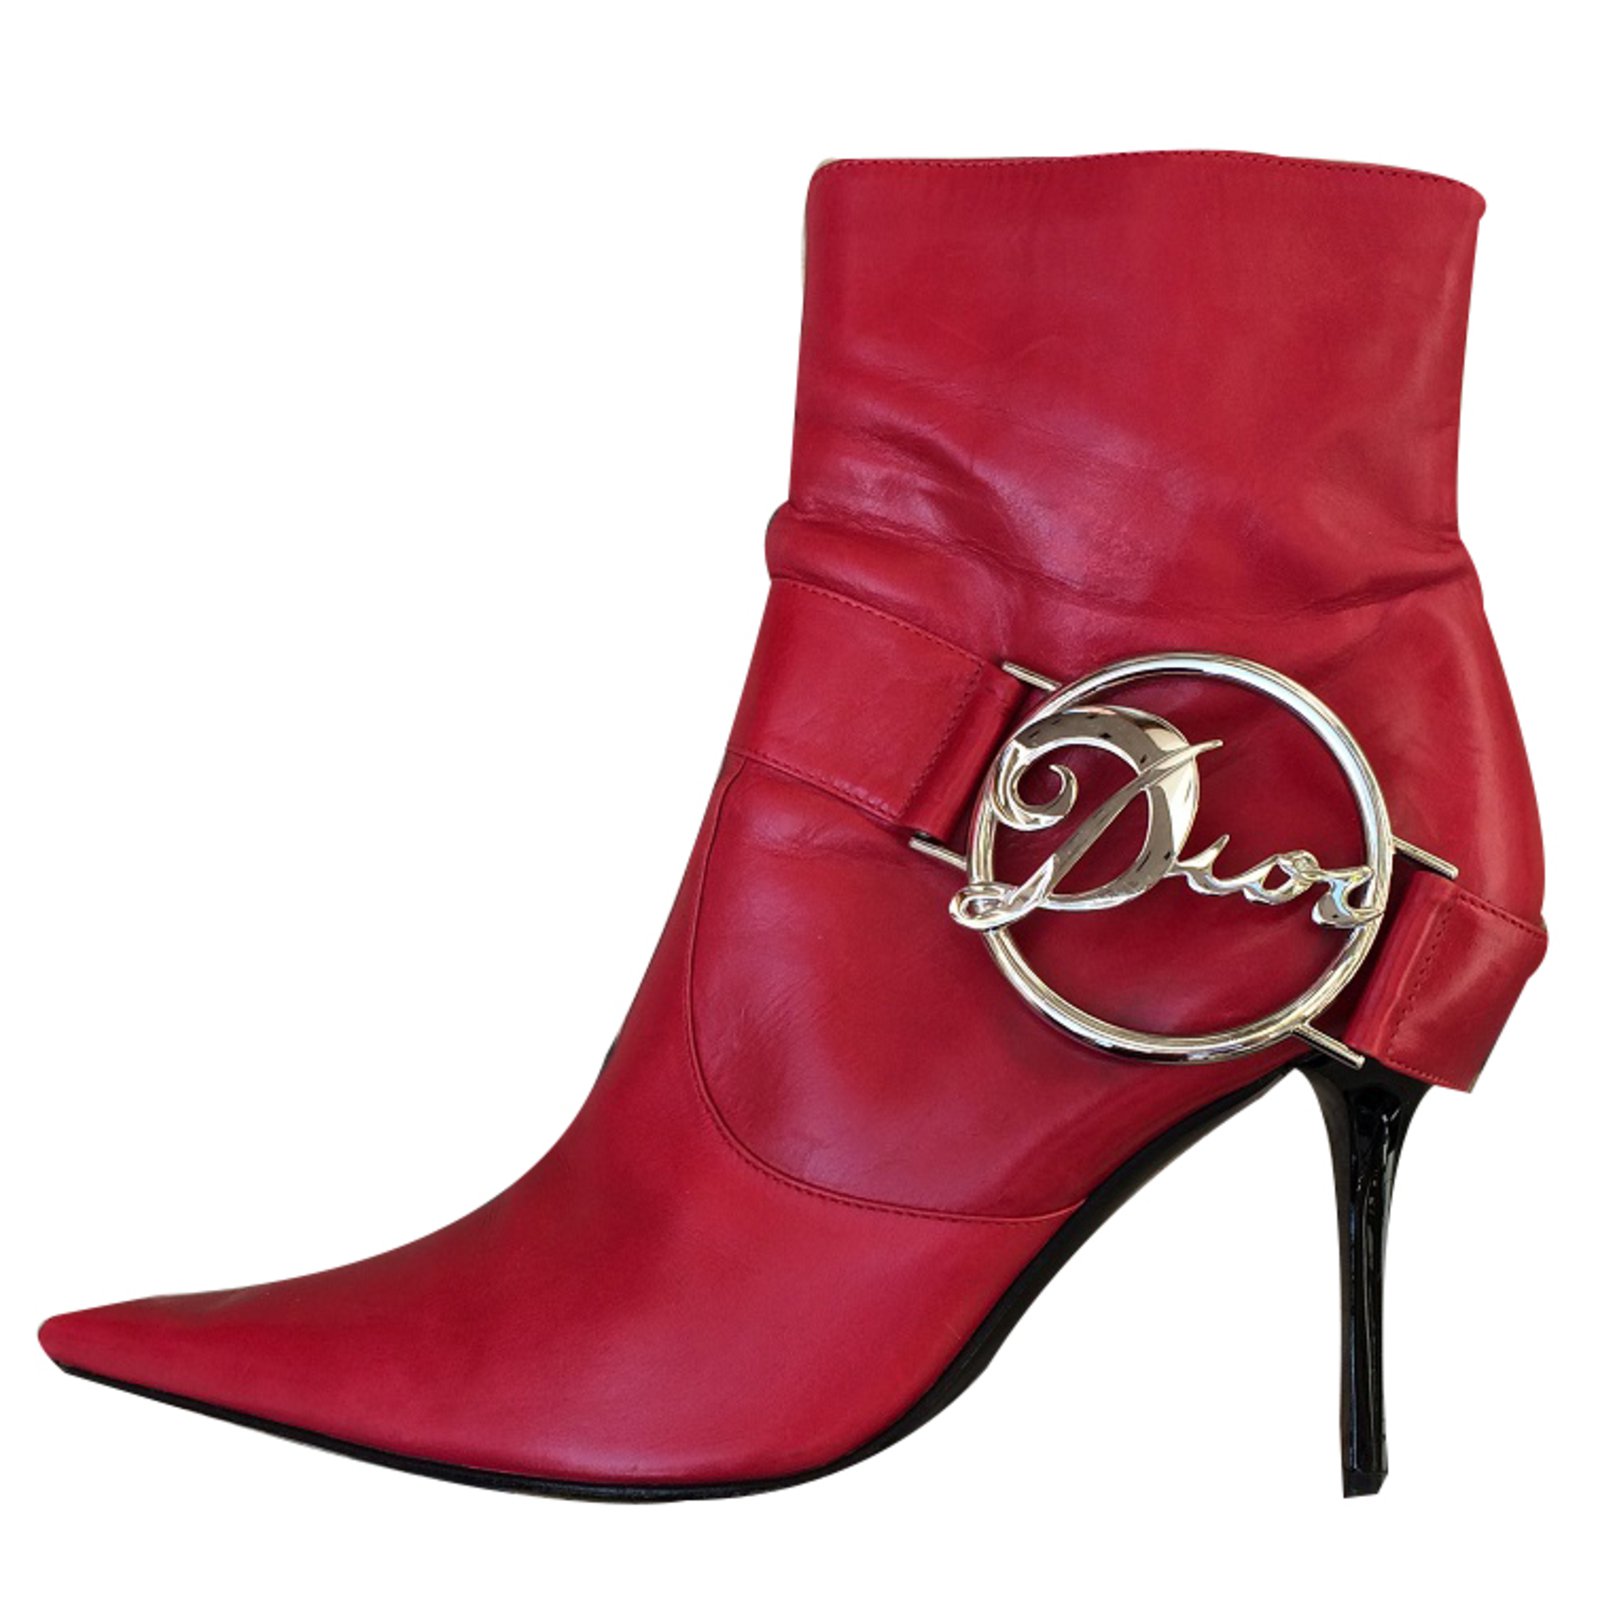 Dior, Shoes, Beautiful Dior Booties